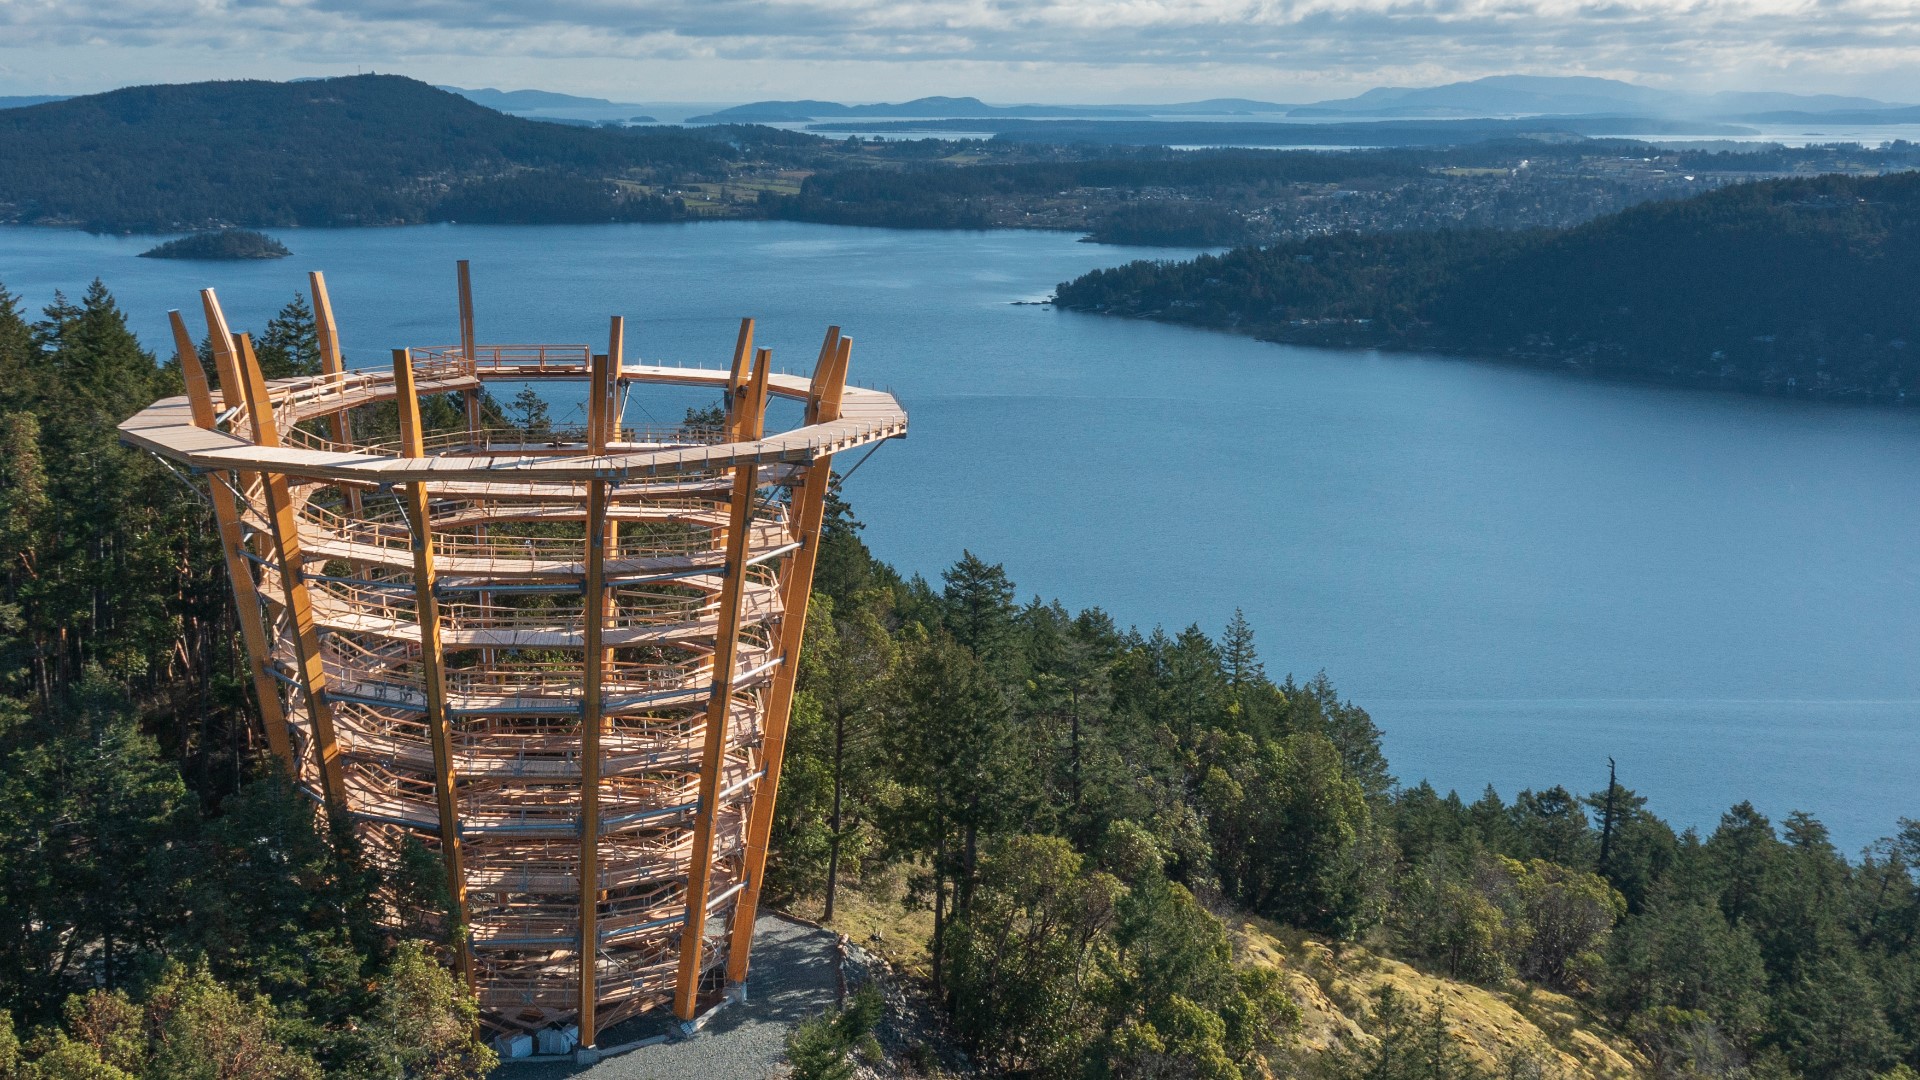 The Malahat Skywalk offers accessibility, a two country view and A SLIDE